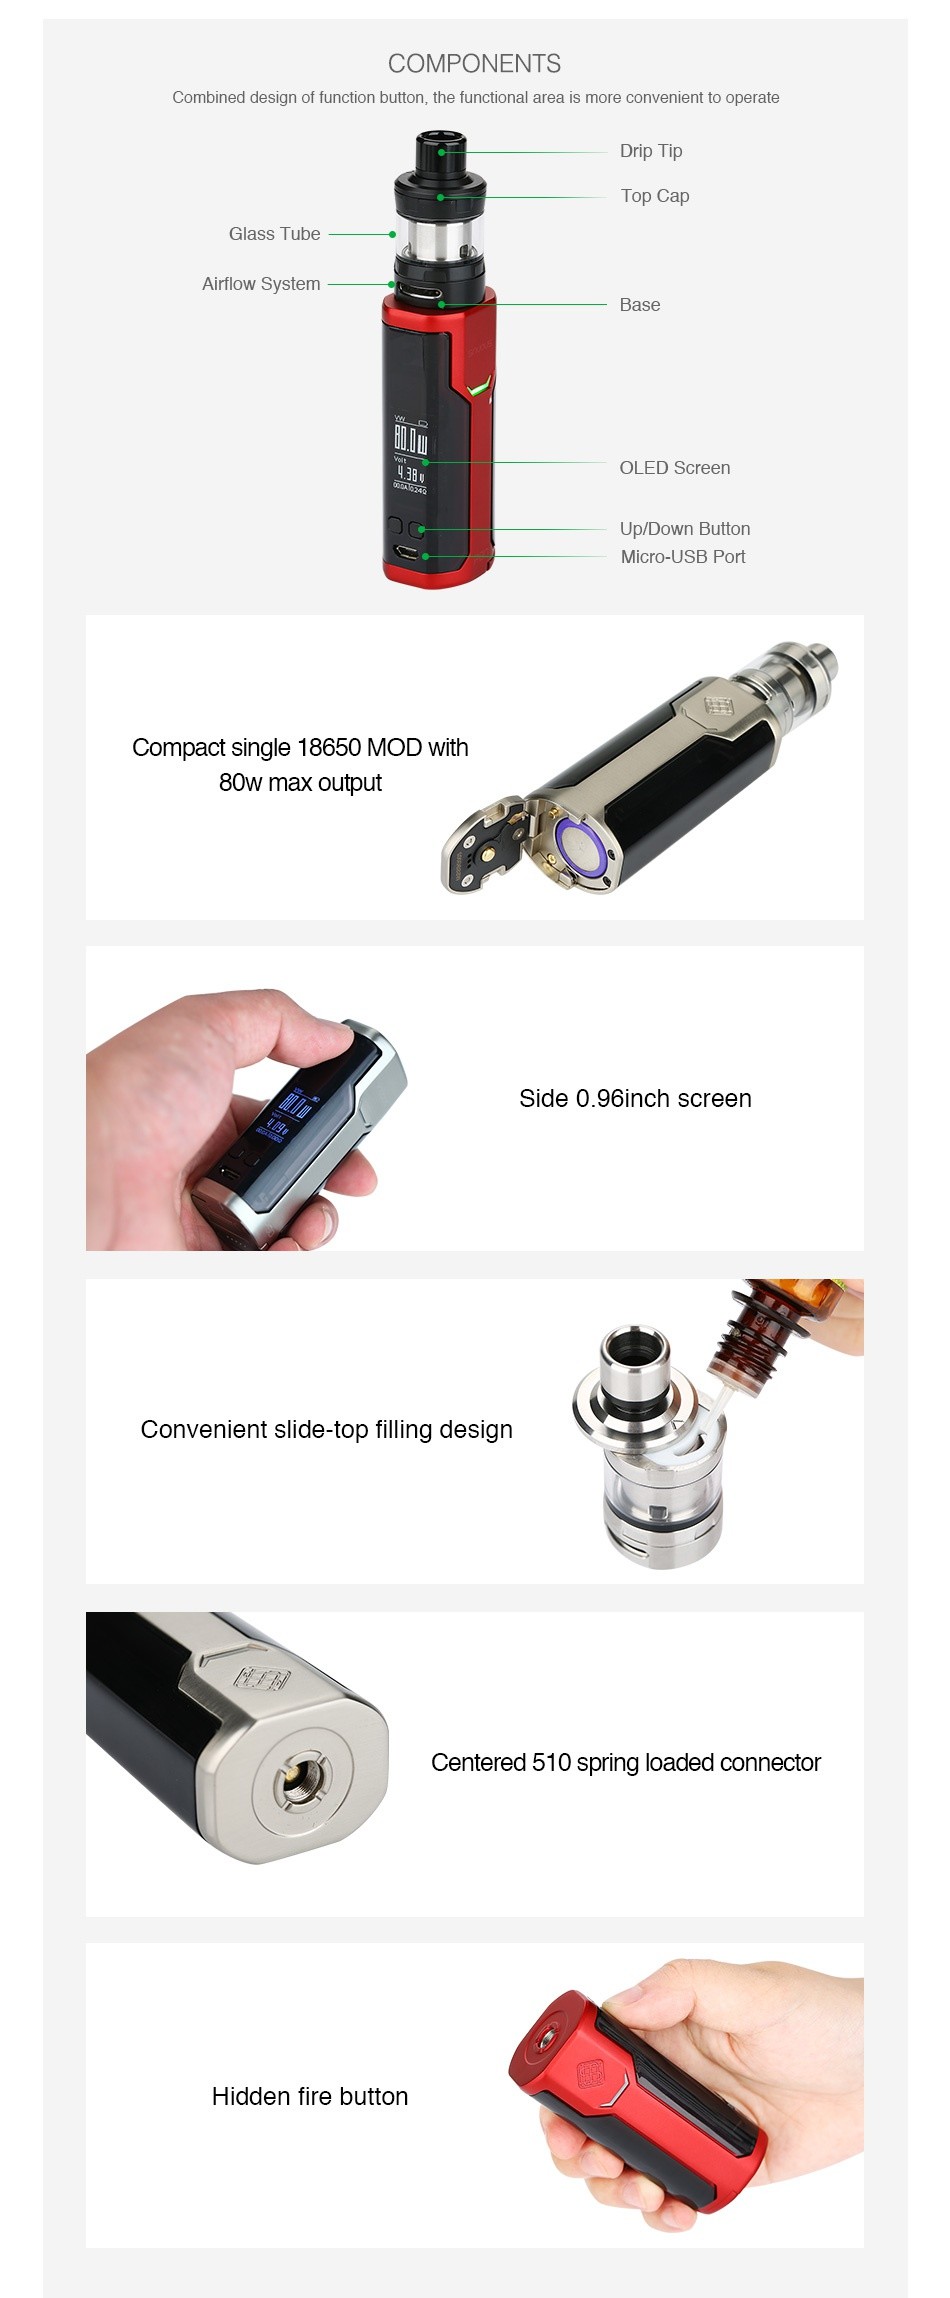 WISMEC SINUOUS P80 with Elabo Mini TC Kit COMPONENTS Combined design of function button  the functional area is more convenient to operate Drip Tip Glass tube Airflow Systcm Base OLED Scrccn Up Down Button Micro USB Port Compact single 18650 MOD with 80w max output Sideo grinch screen Convenient slide top filling design Centered 510 spring loaded connector Iden fire button